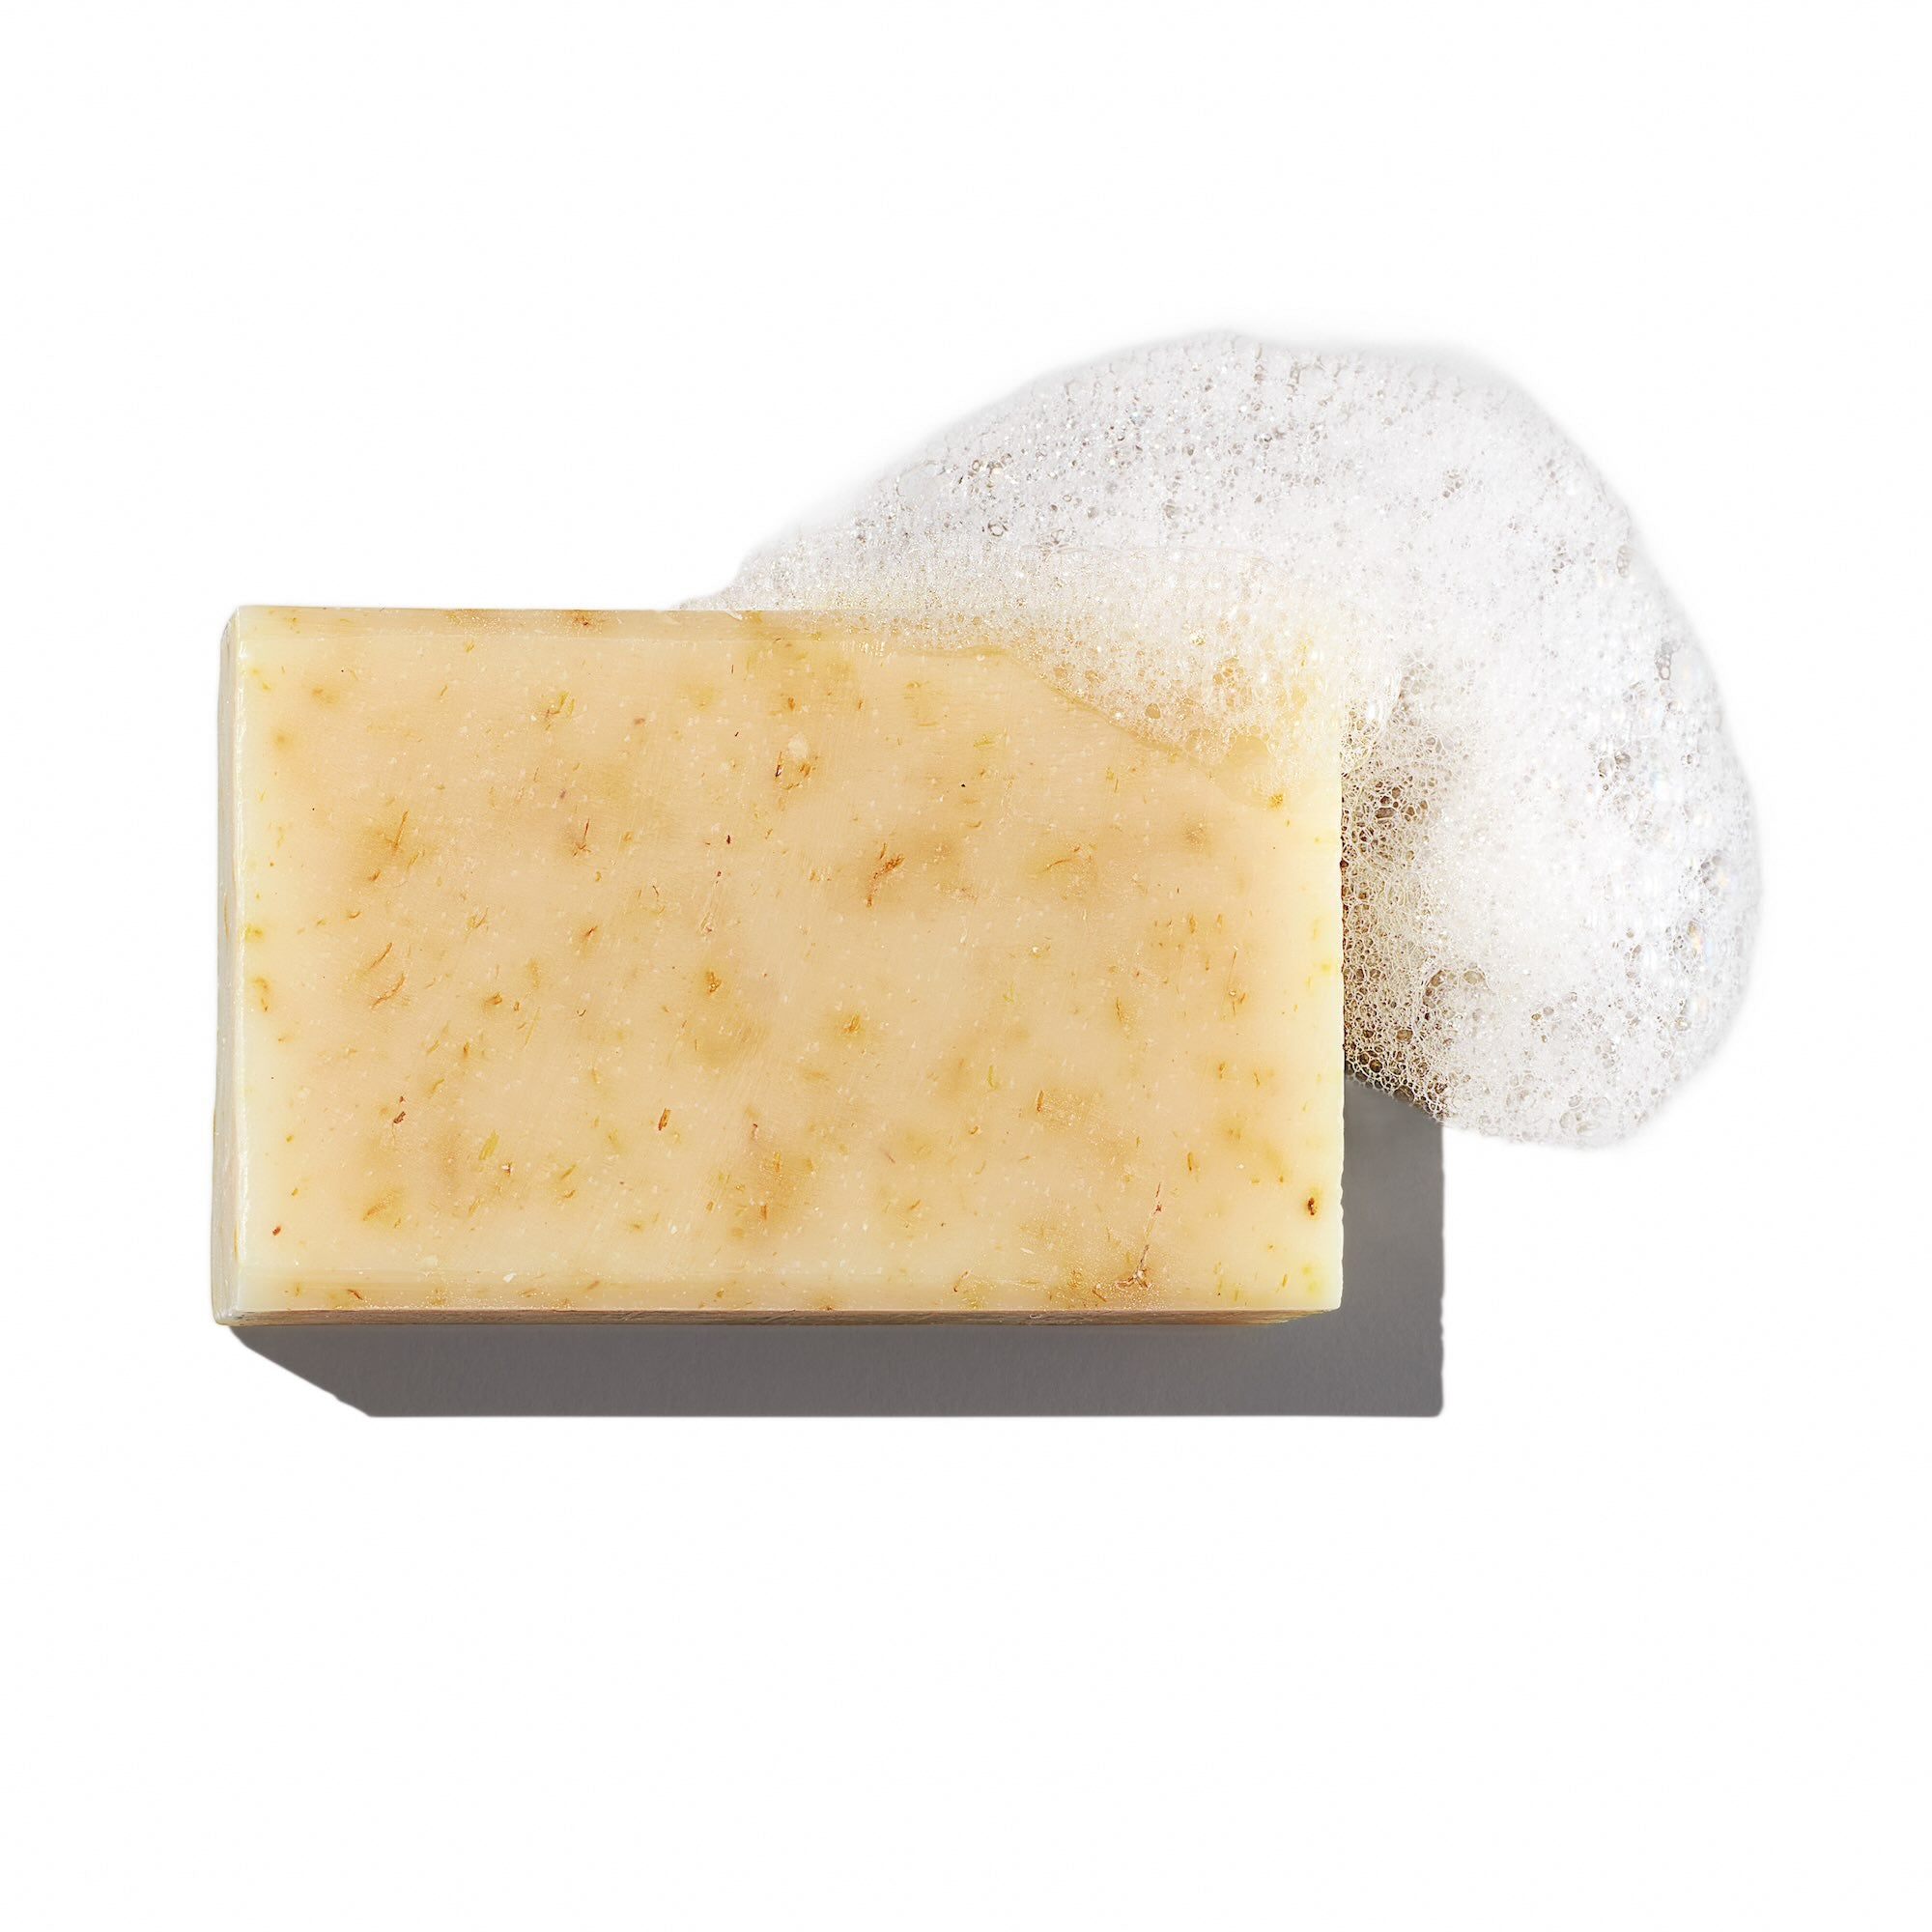 Bia unscented soap with soap bubbles on a white background.